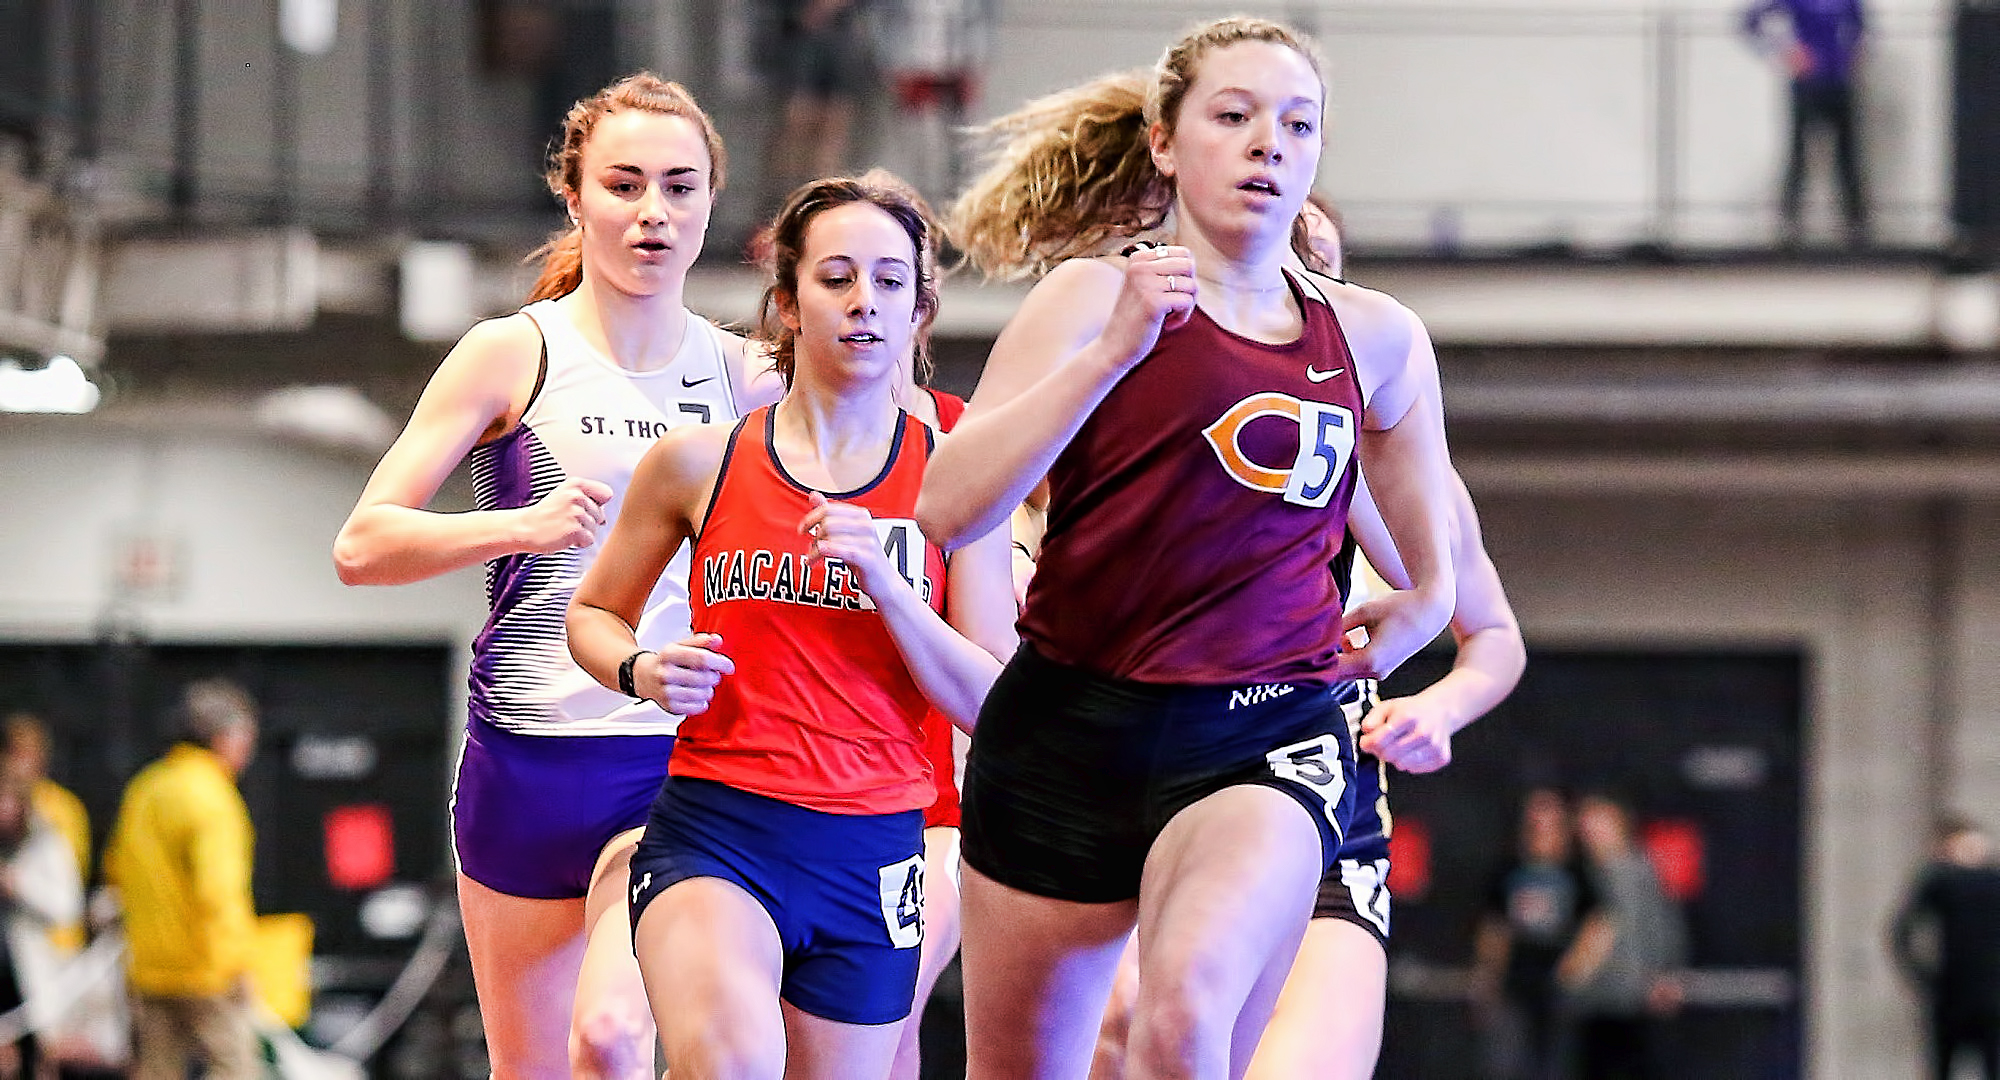 Sophomore Josie Herrmann sprints past a pack of runners during her second-place finish in the 800 meters at the MIAC Indoor Meet. (Photo courtesy of Nathan Lodermeier)